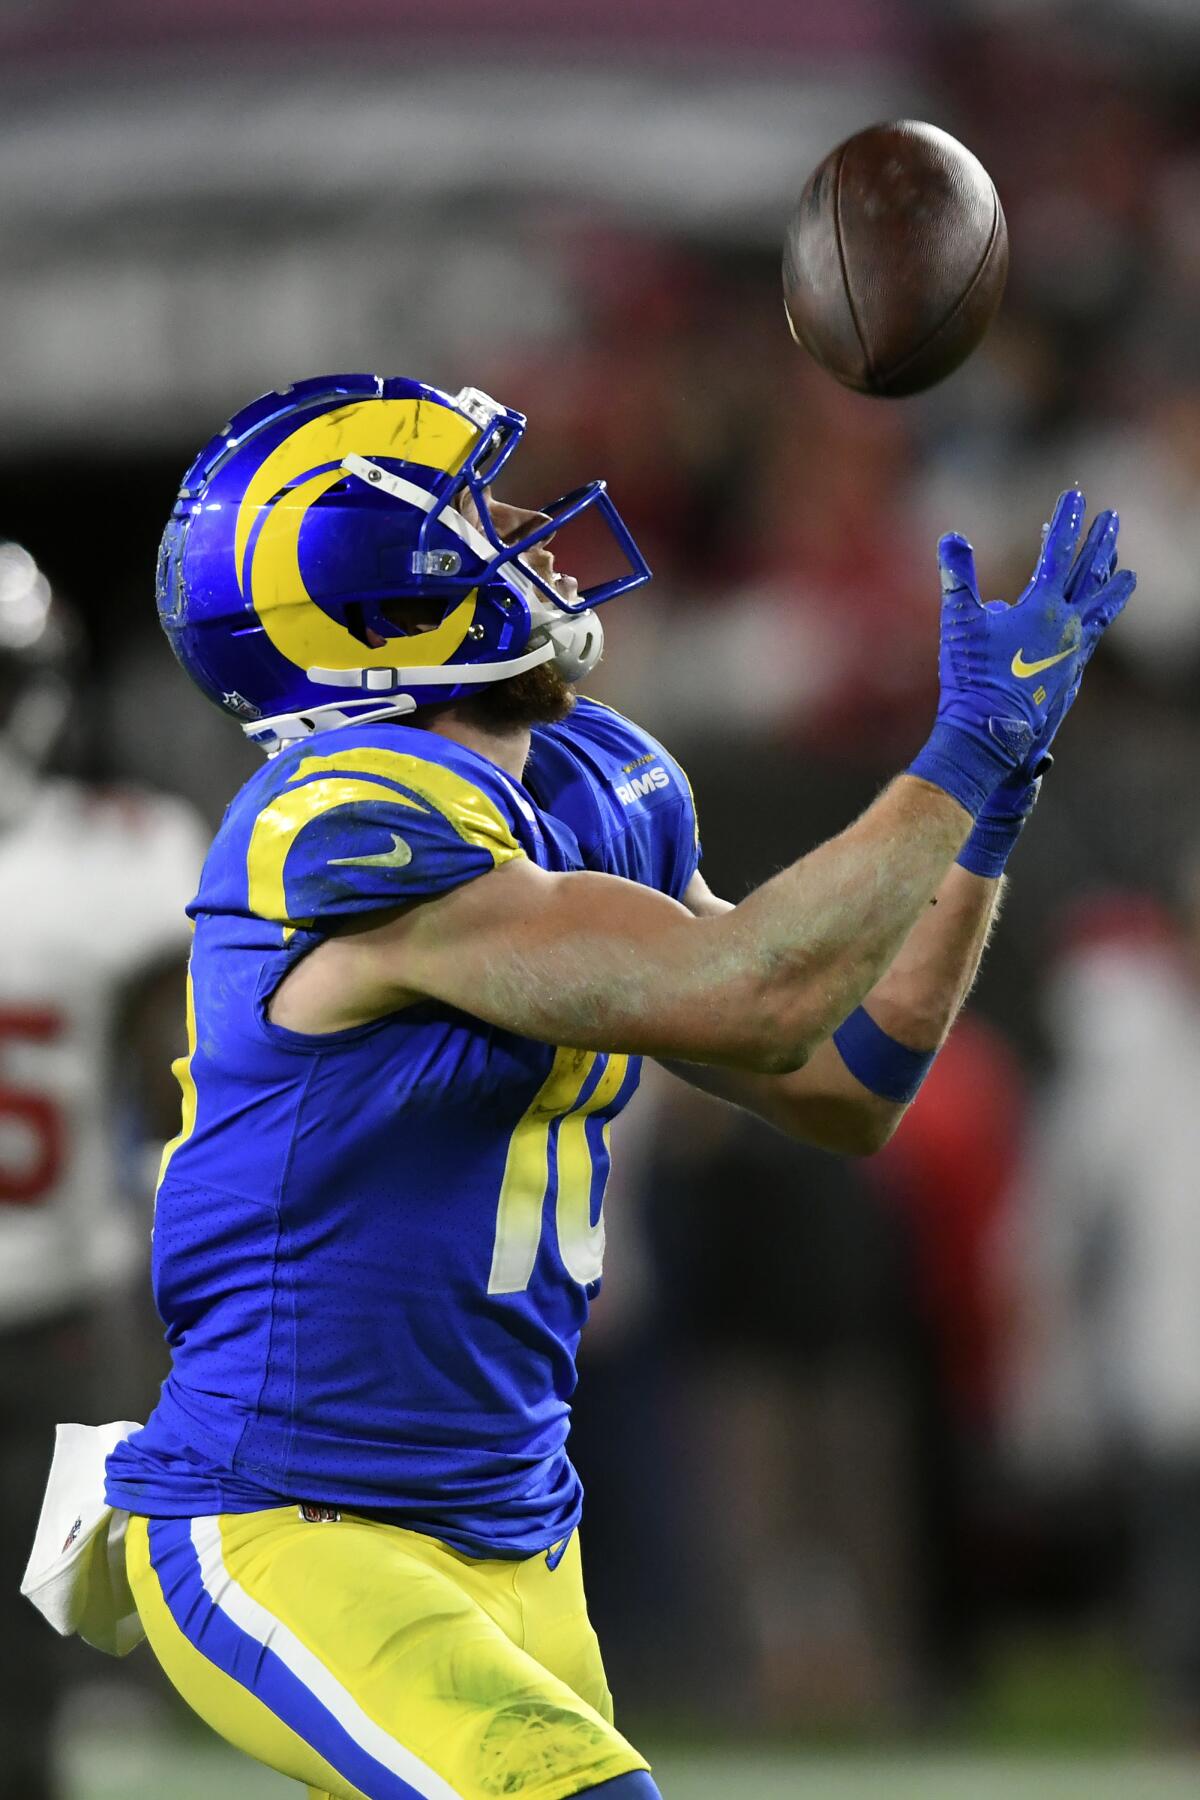 Star-studded LA Rams host surging 49ers in NFC title game - The